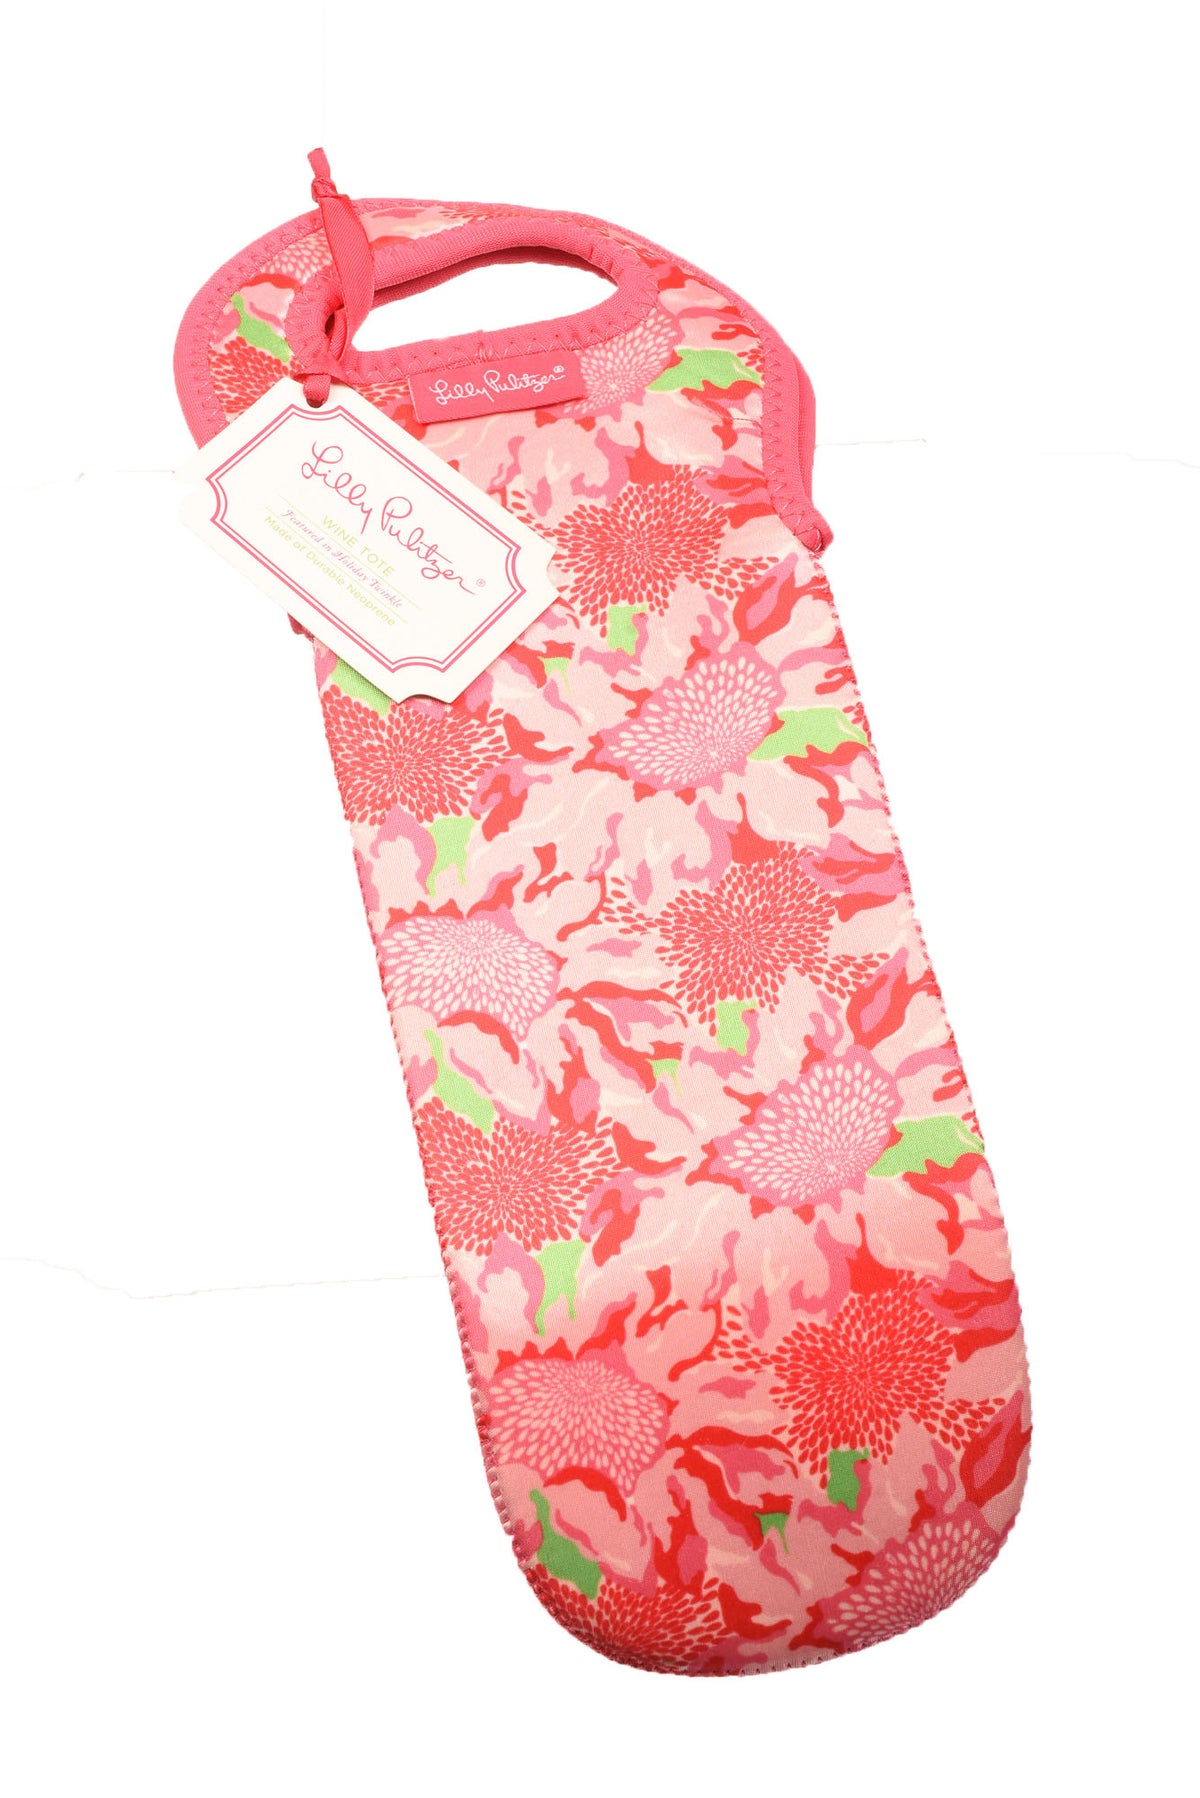 Lilly Pulitzer Wine Tote